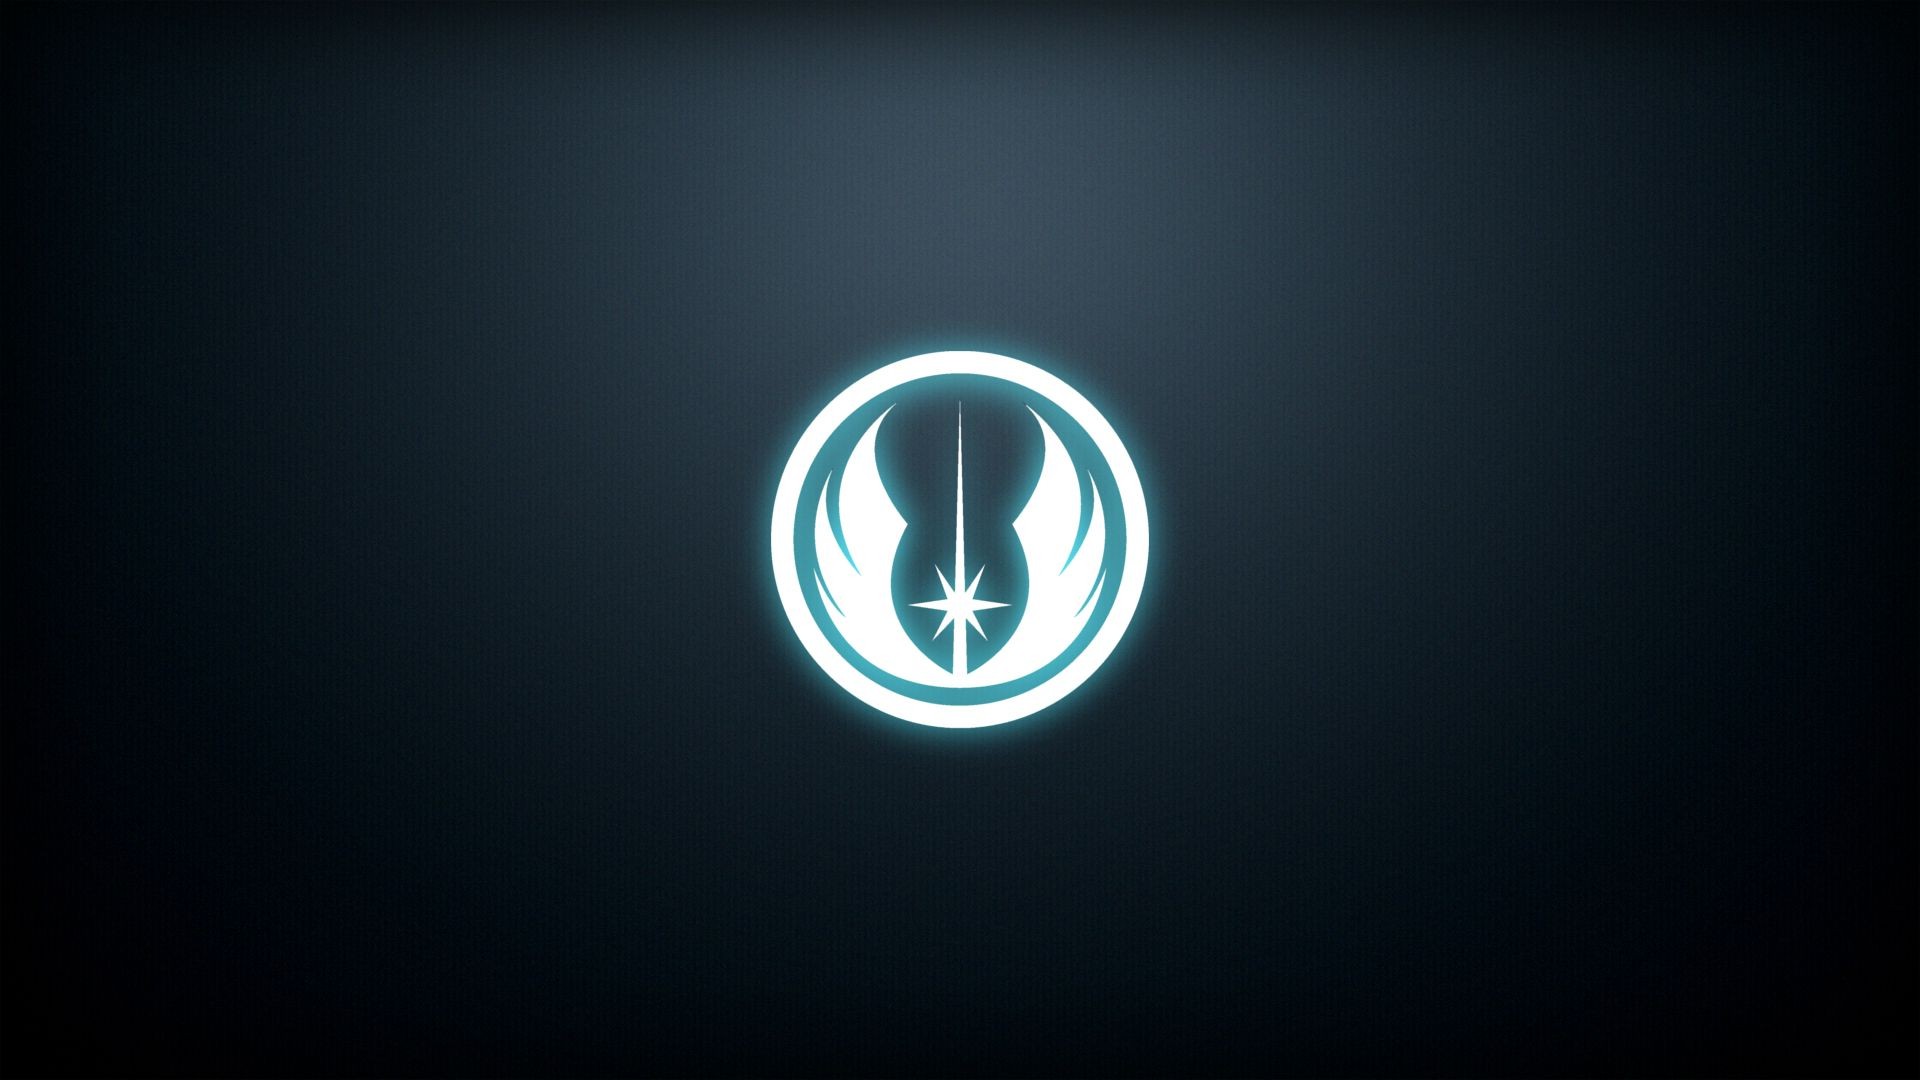 Star Wars Jedi  Wallpapers  HD  Desktop and Mobile Backgrounds 